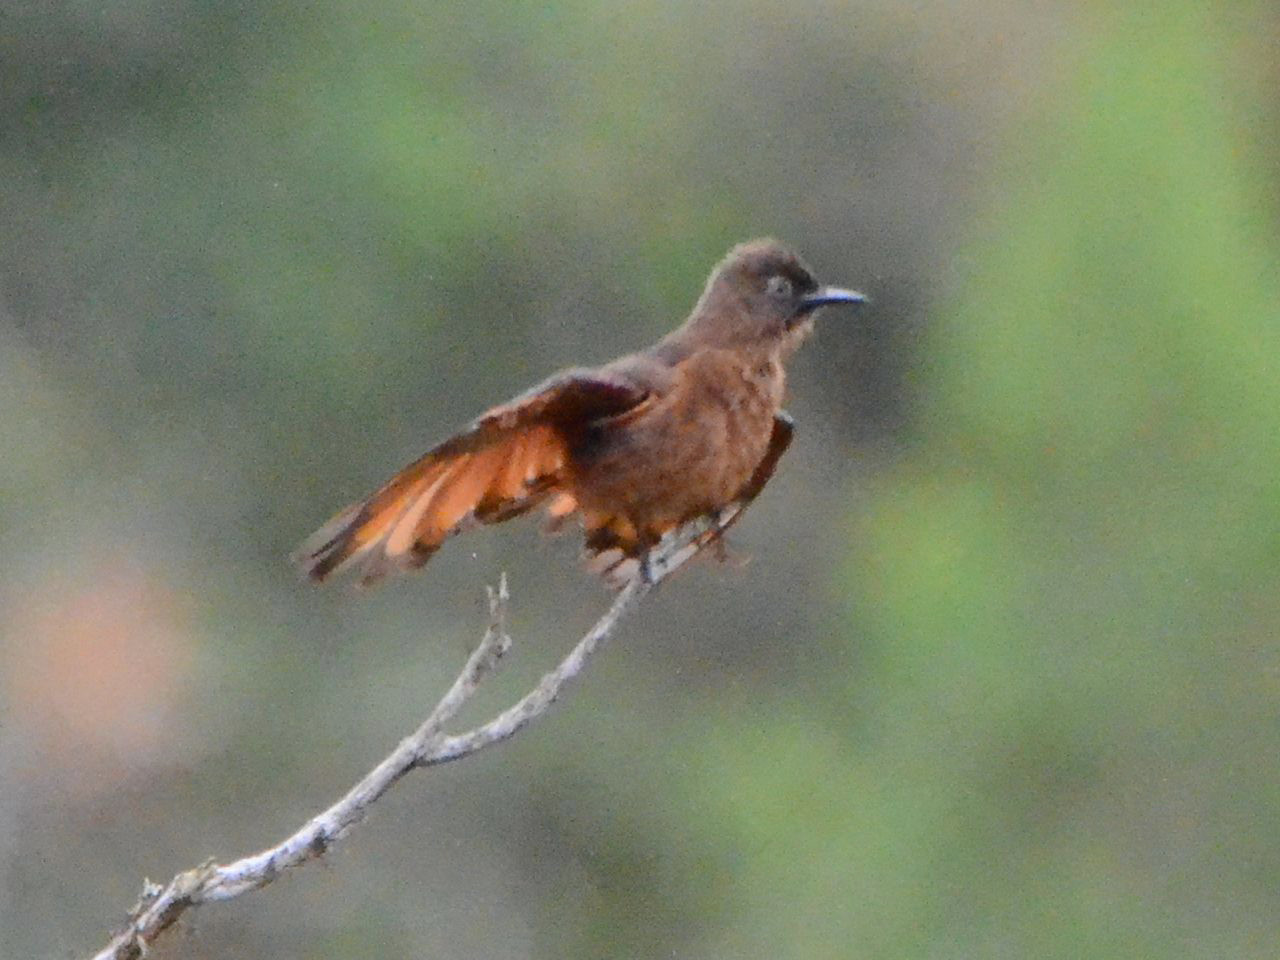 Click picture to see more Cliff Flycatchers.